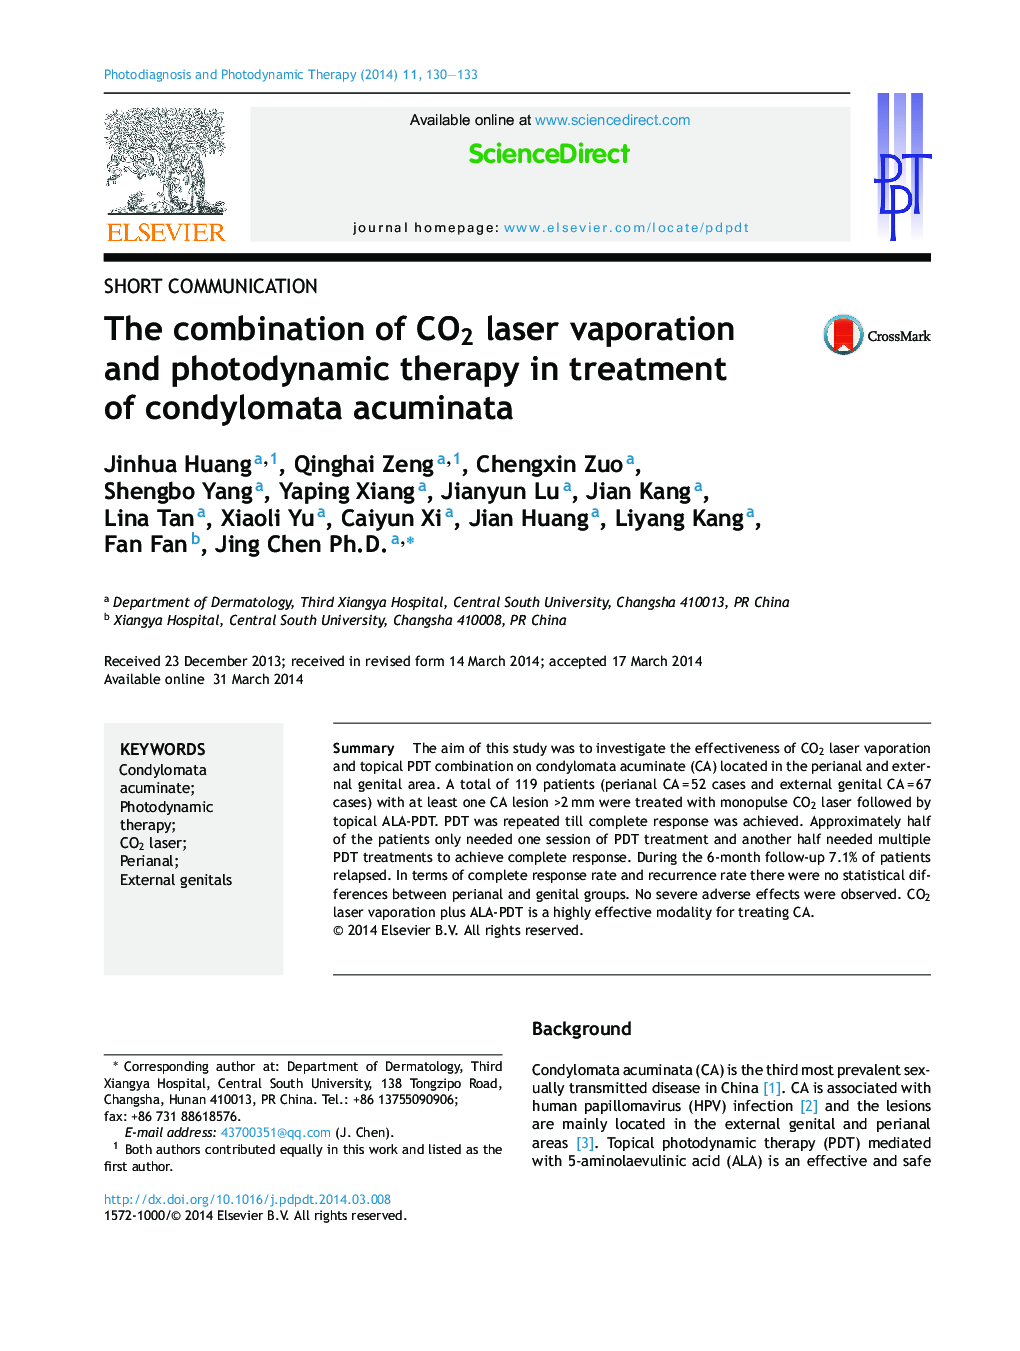 The combination of CO2 laser vaporation and photodynamic therapy in treatment of condylomata acuminata